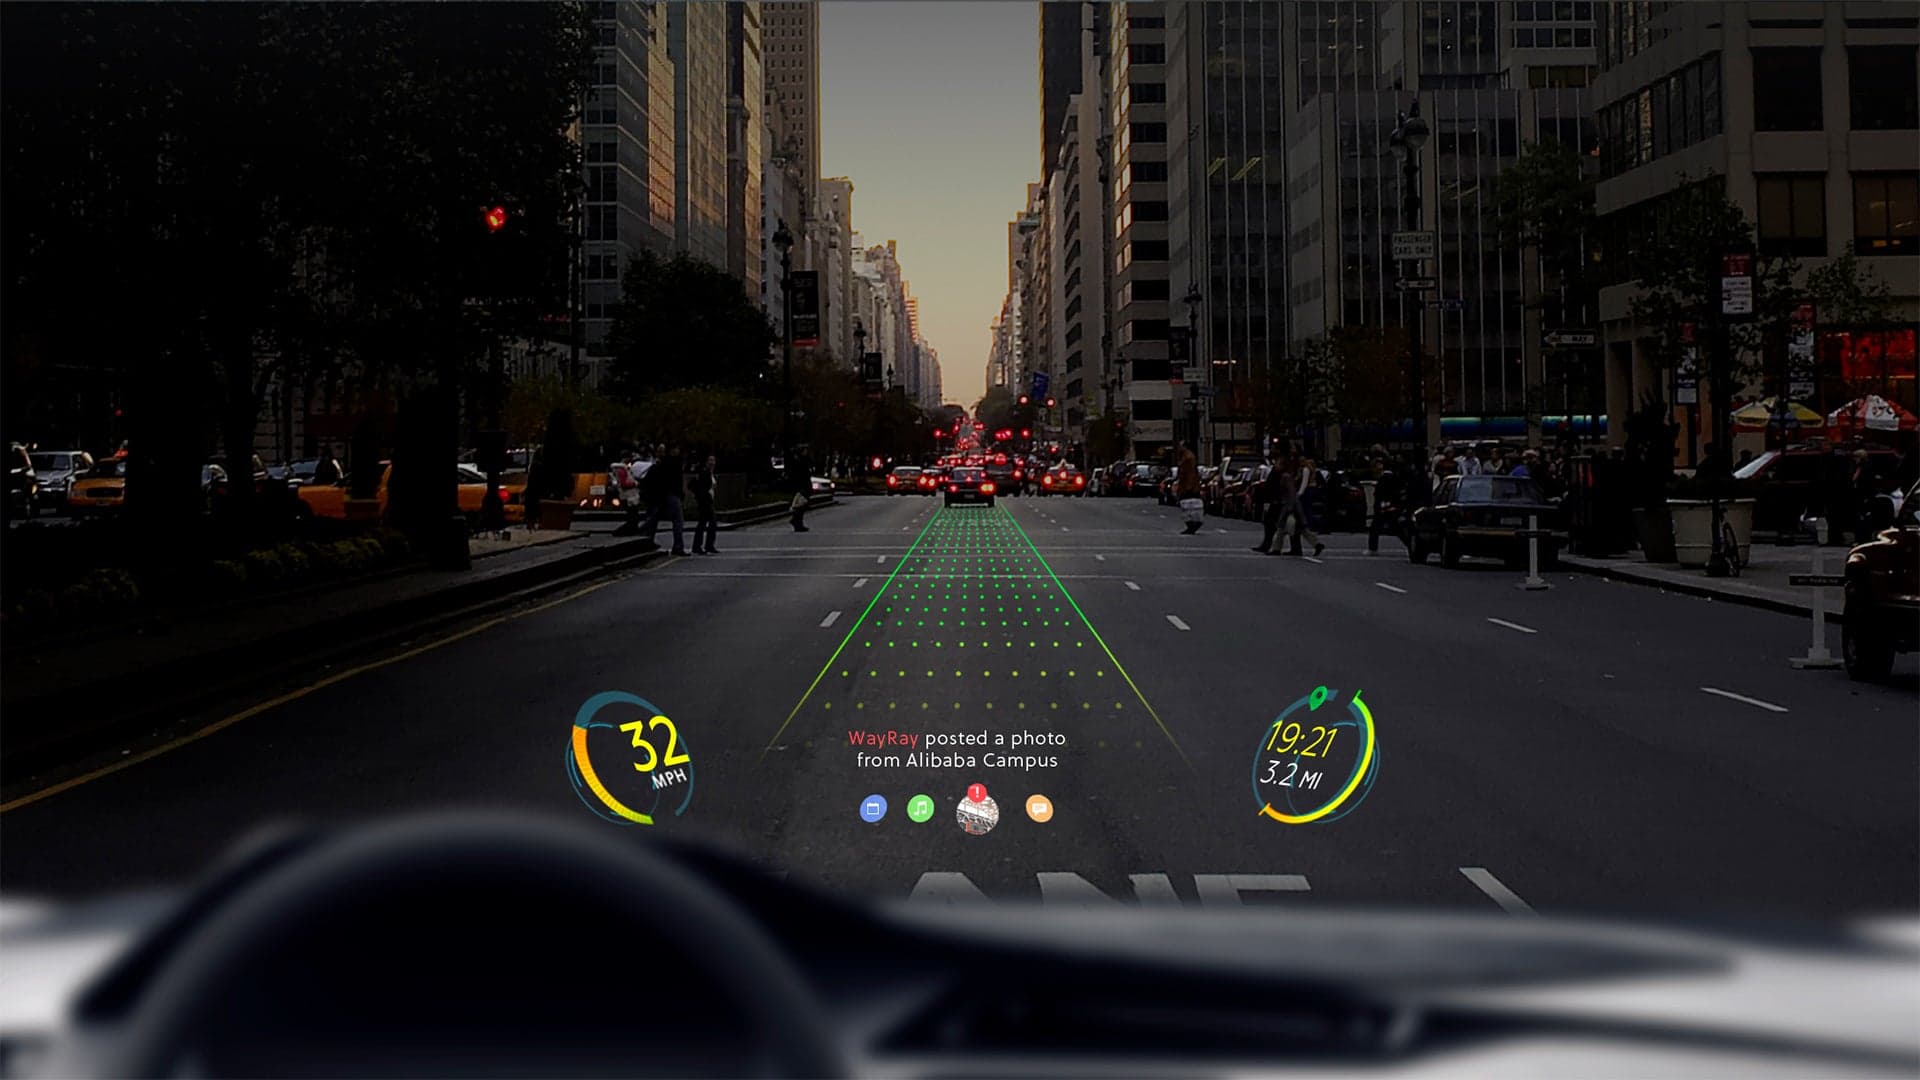 Alibaba Could Put Augmented Reality Navigation in Cars This Year